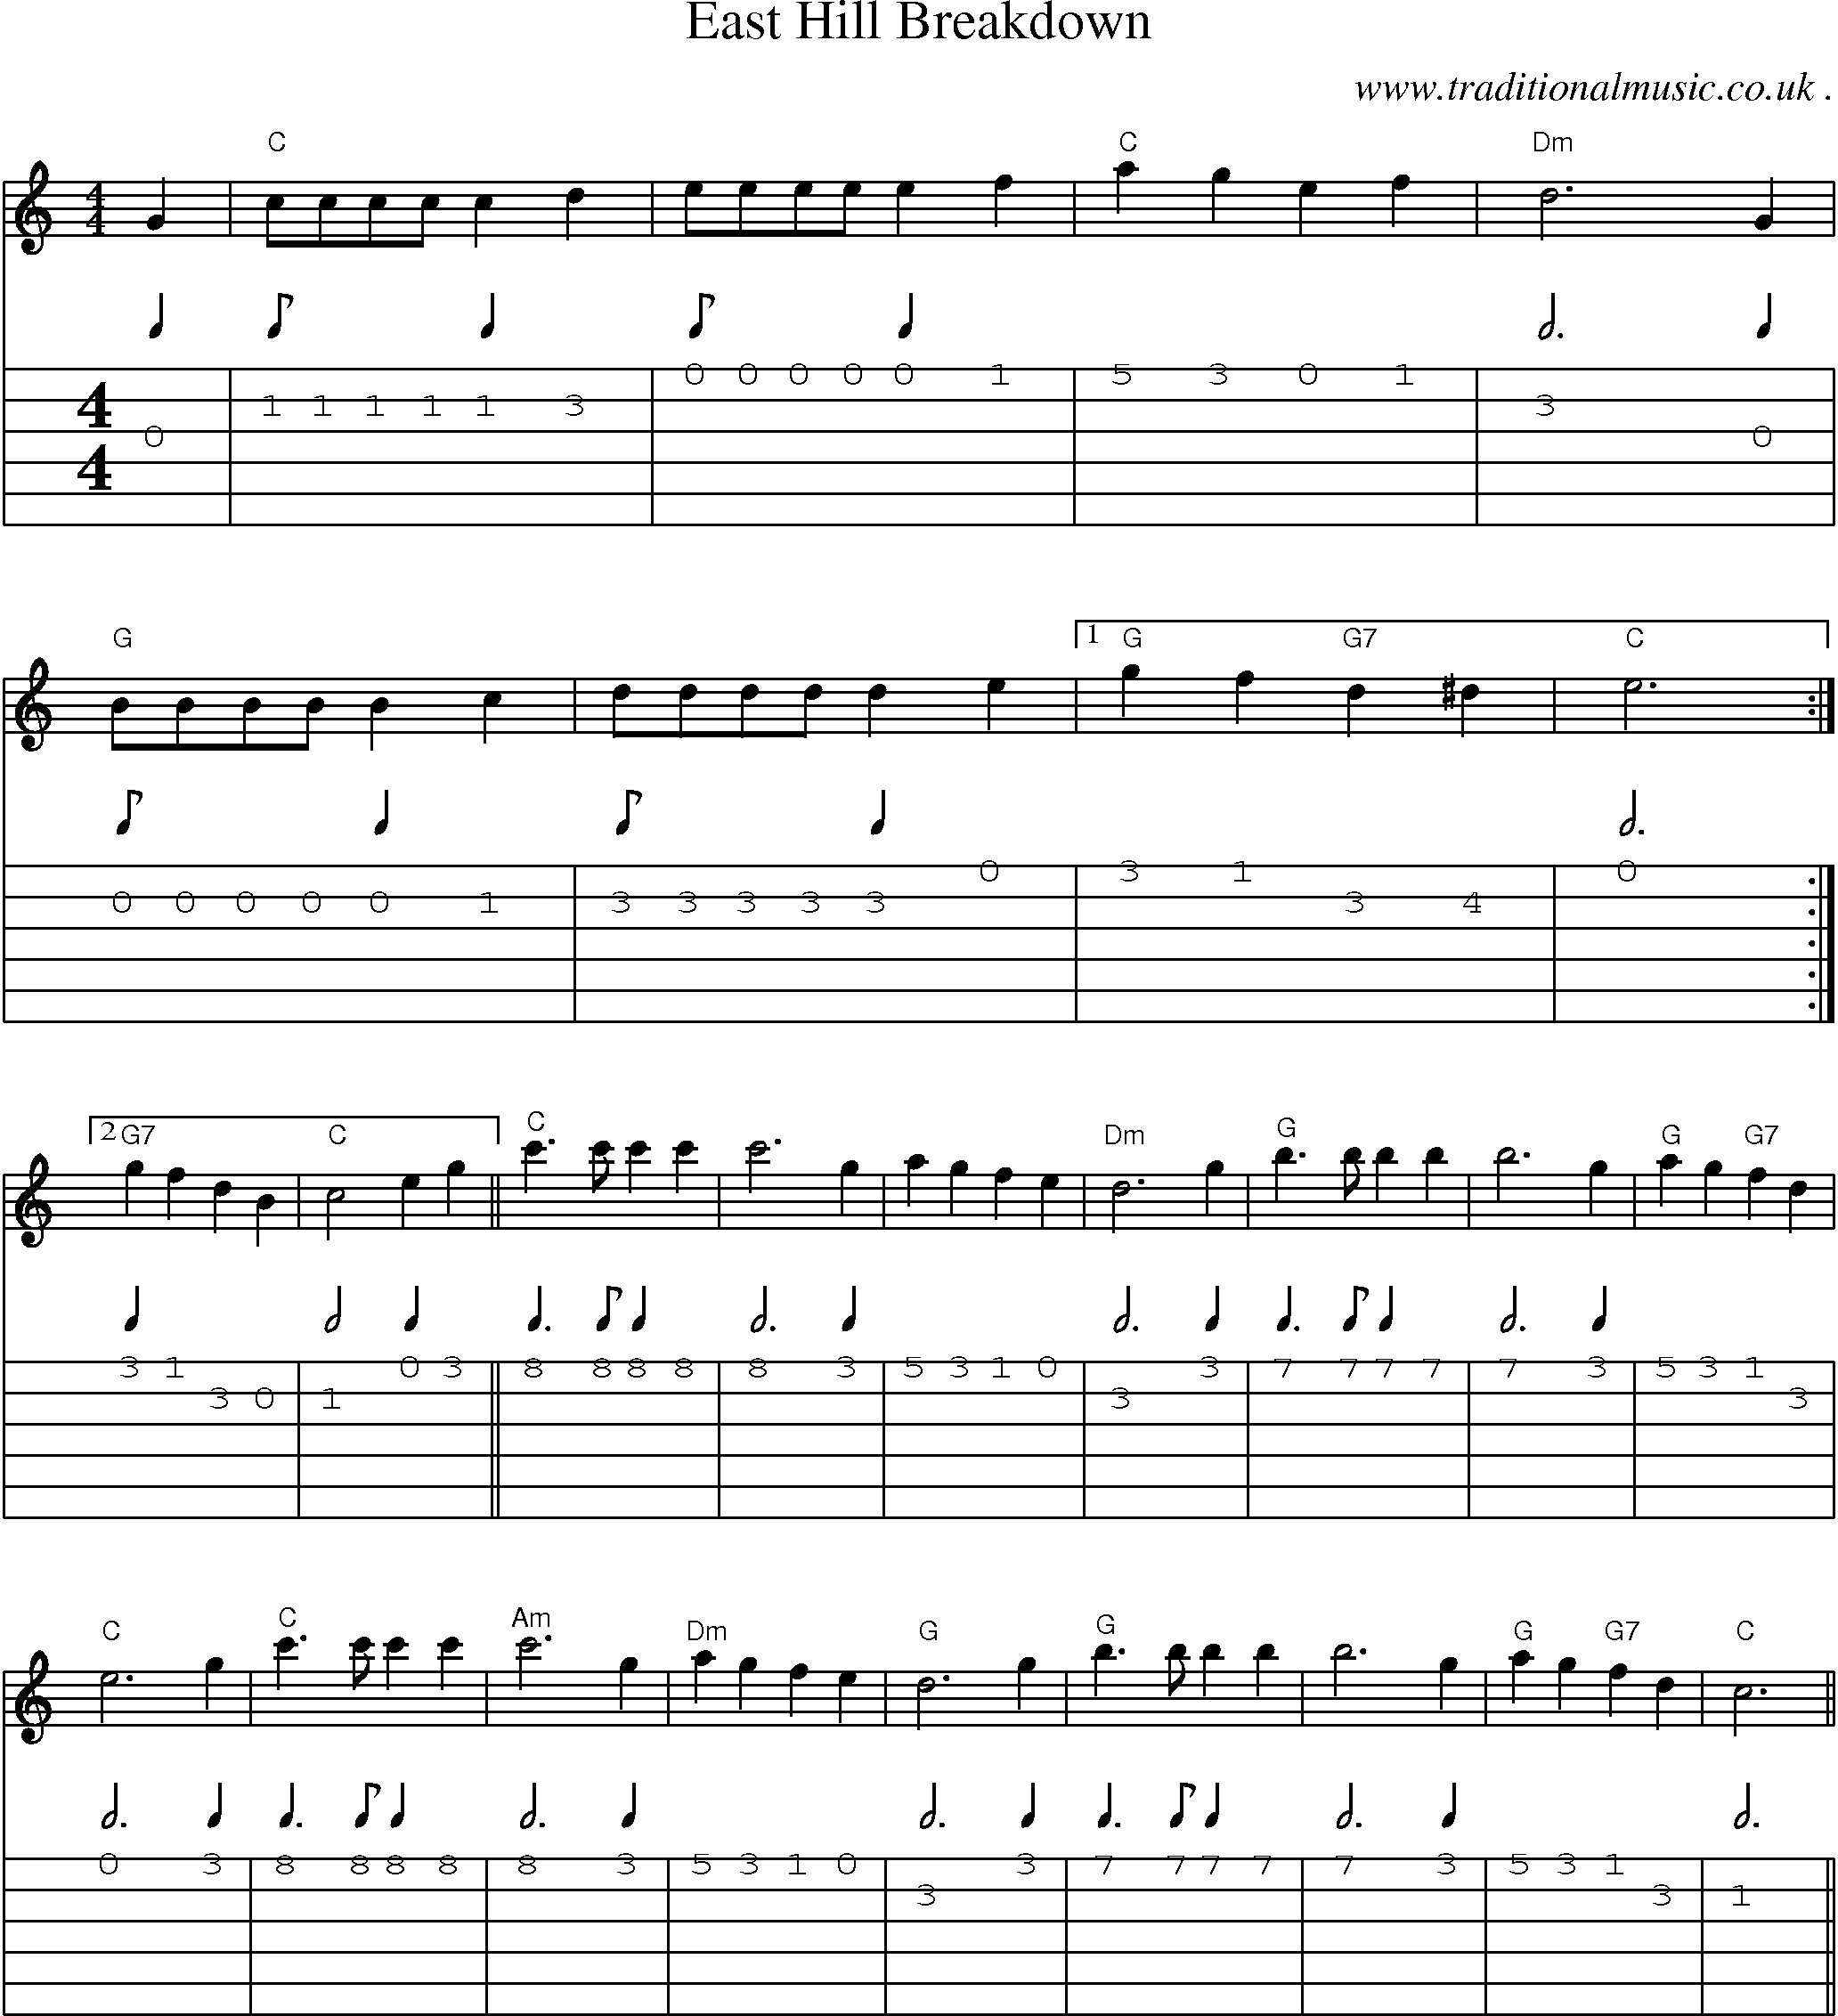 Sheet-Music and Guitar Tabs for East Hill Breakdown